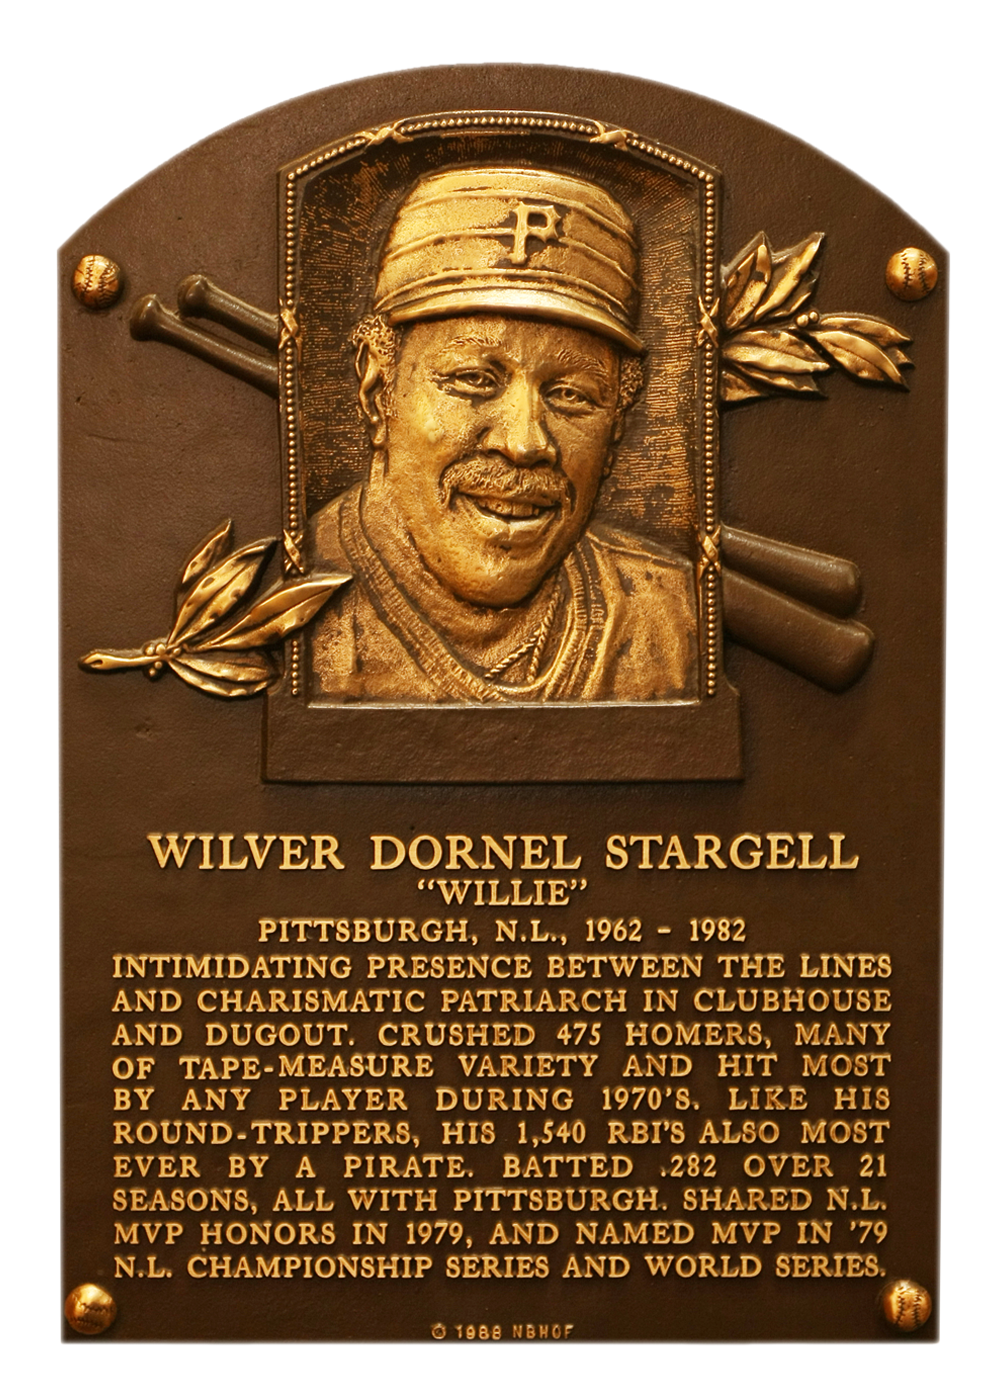 Willie Stargell Hall of Fame plaque